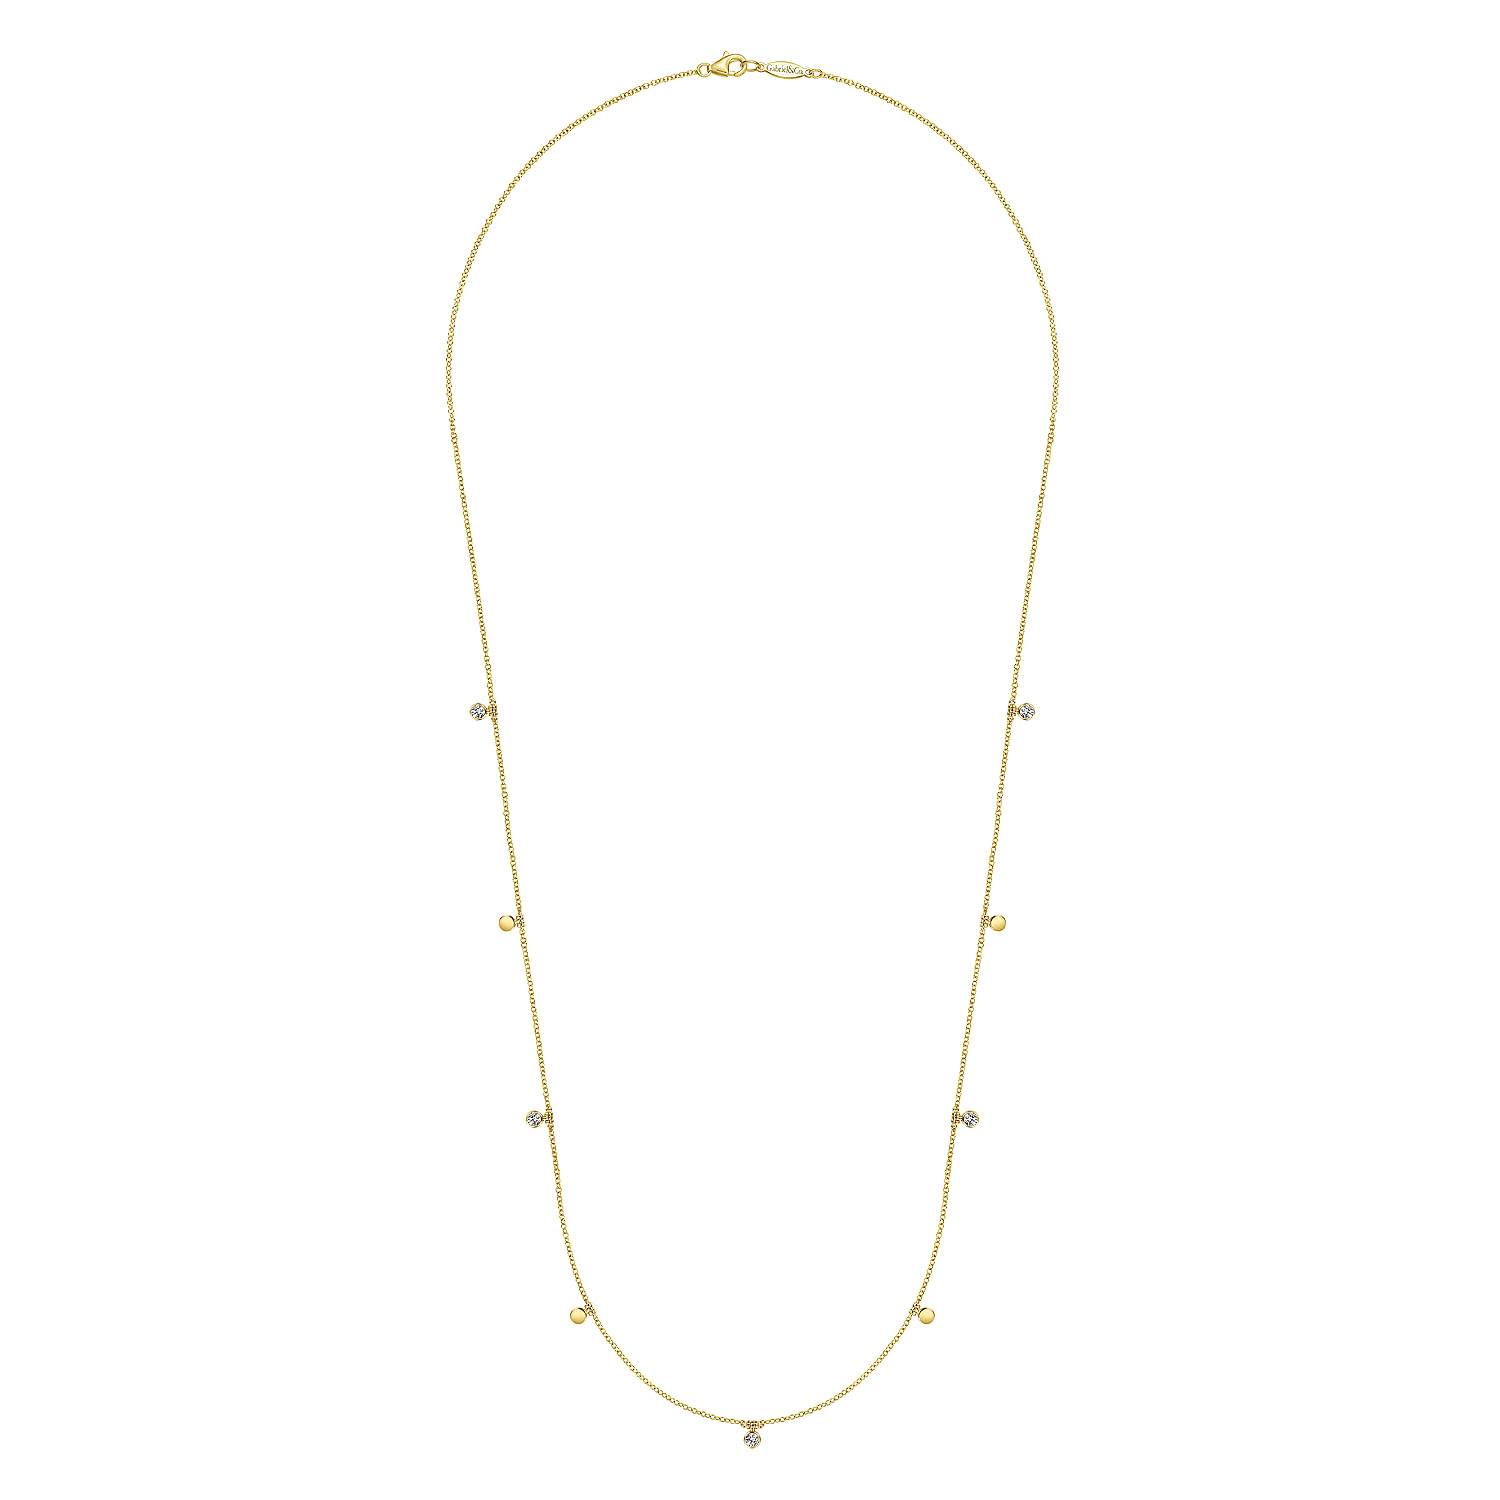 24 inch 14K Yellow Gold Diamond and Disc Station Necklace